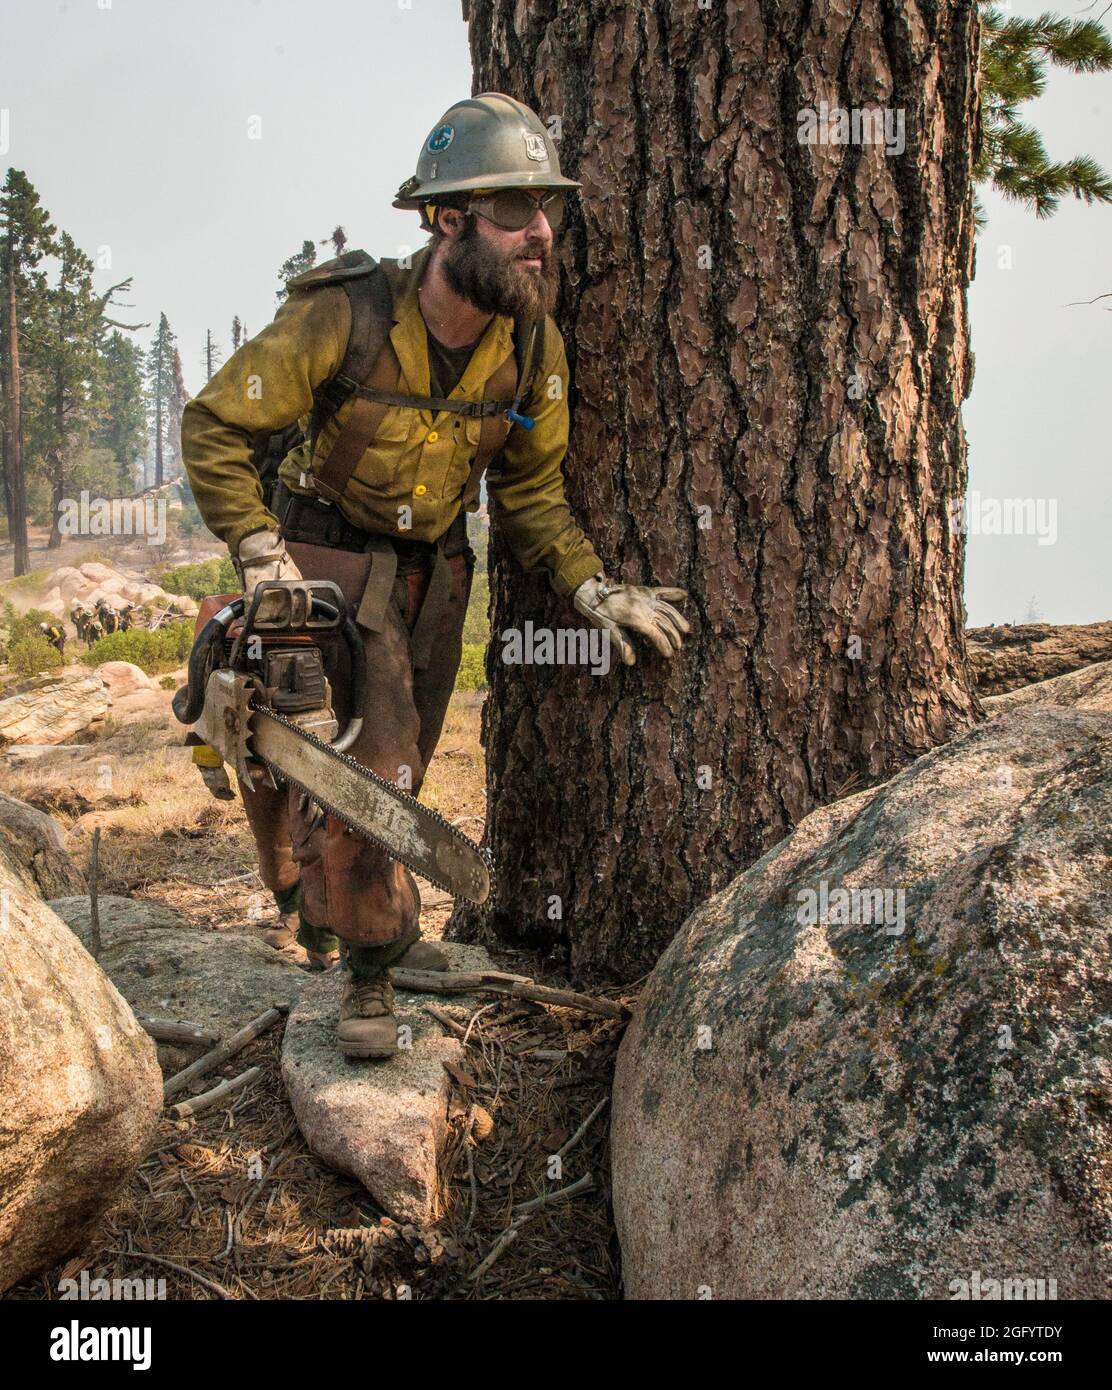 U.S. Department of Agriculture (USDA) Forest Service (FS) Forestry Technician Clyde Carroll mitigate trail hazards by clearing pathways blocked by dead and fallen trees and brush allowing  other crews to better get in and out of the area to help stop the Cedar Fire in the and around the Sequoia National Forest, and Posey, CA, on Tuesday, August 23, 2016. USDA Photo by Lance Cheung.  For more information please see: www.usda.gov www.fs.fed.us @usda @forestservice  See the video about wildland firefighters https://youtu.be/QxJFIfkOQLY Stock Photo